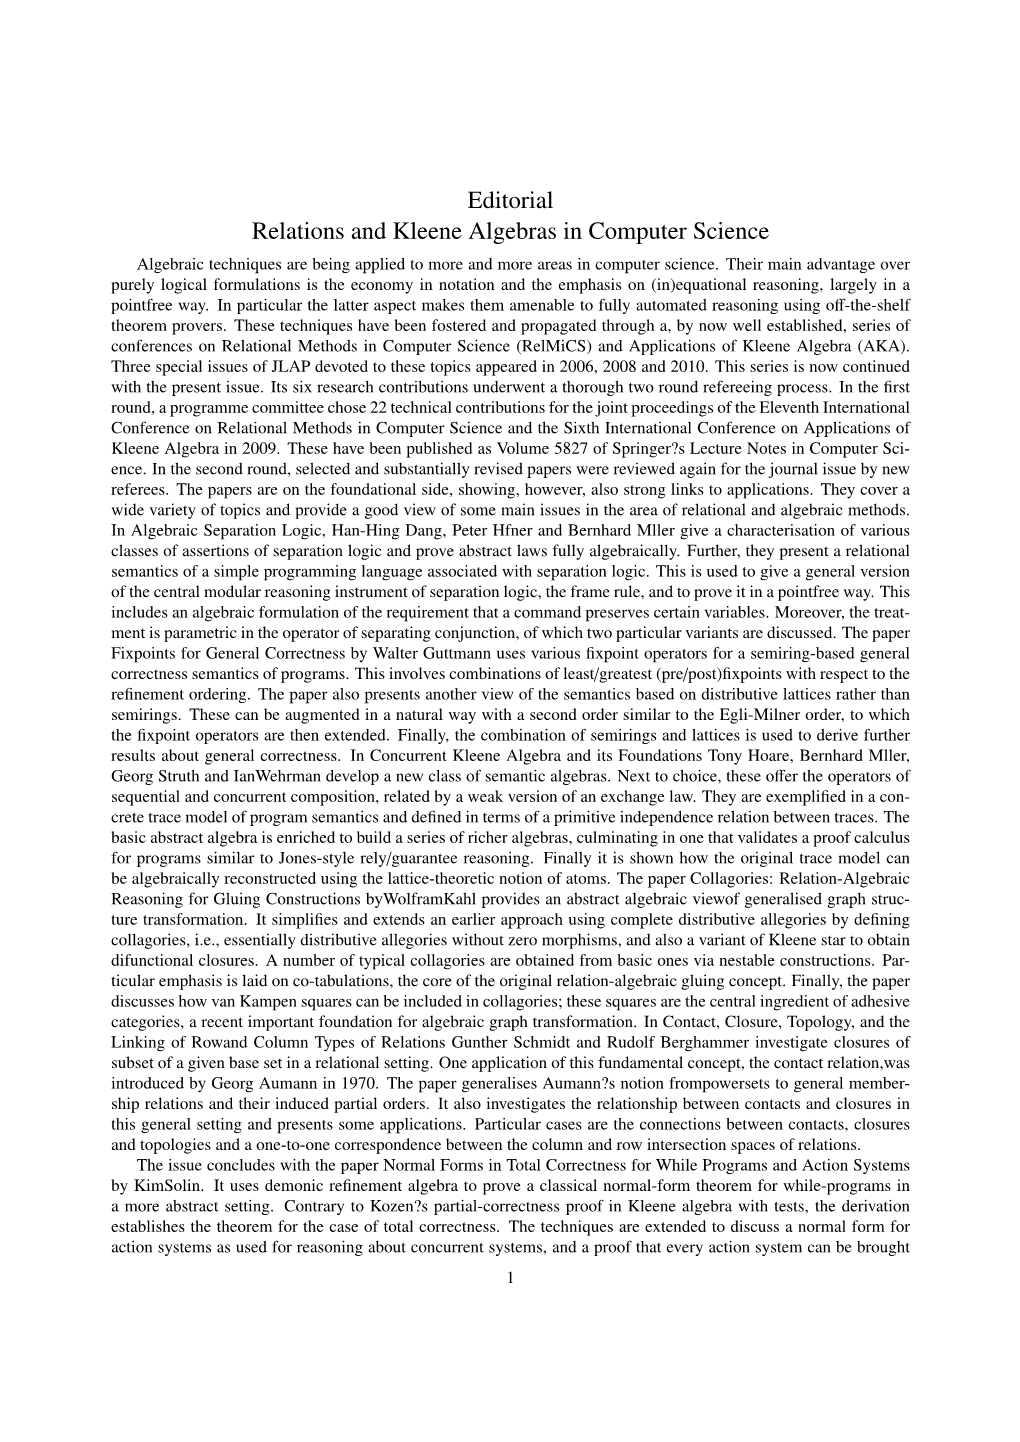 Editorial Relations and Kleene Algebras in Computer Science Algebraic Techniques Are Being Applied to More and More Areas in Computer Science